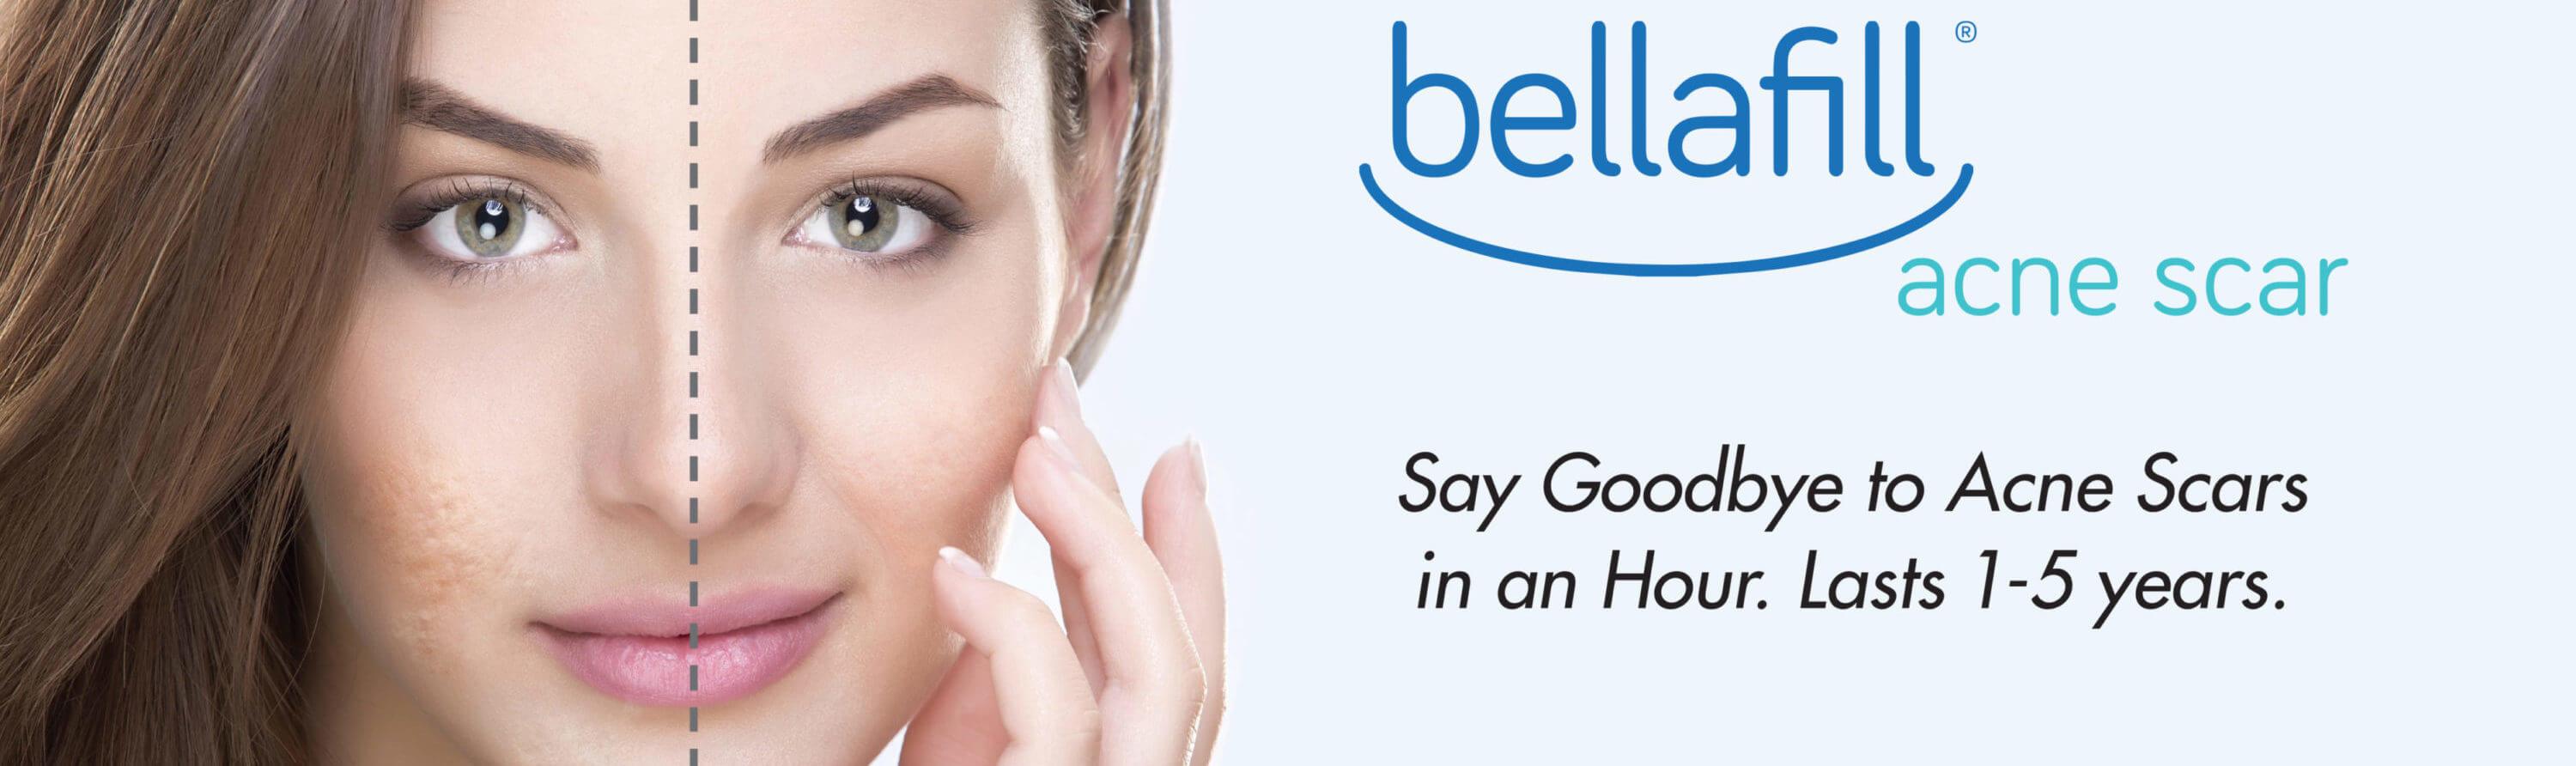 Bellafill Treatment For Reducing Acne Scars Fda Cleared 6294